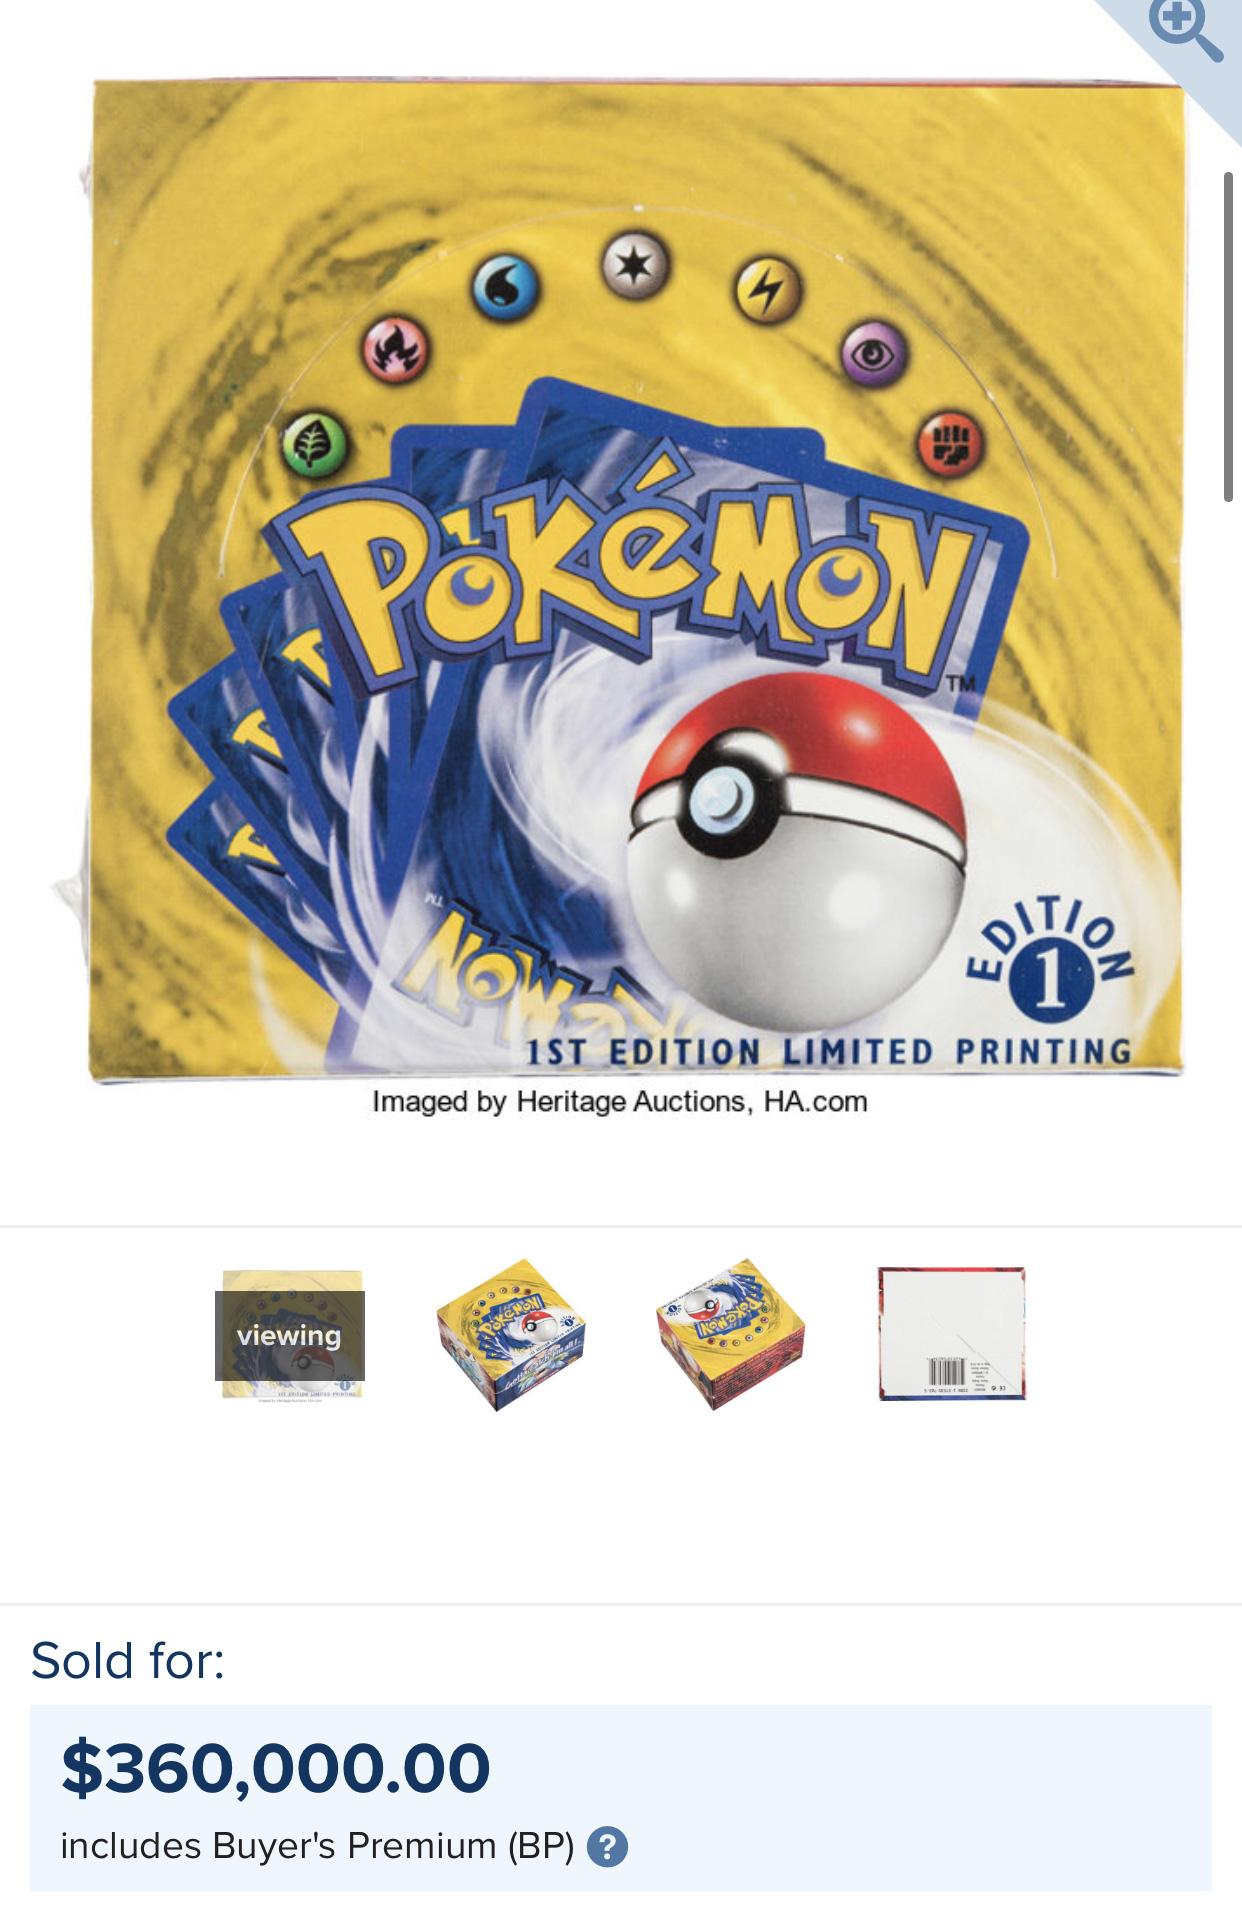 Screenshot of Pokemon card boost box selling at auction for $360k.